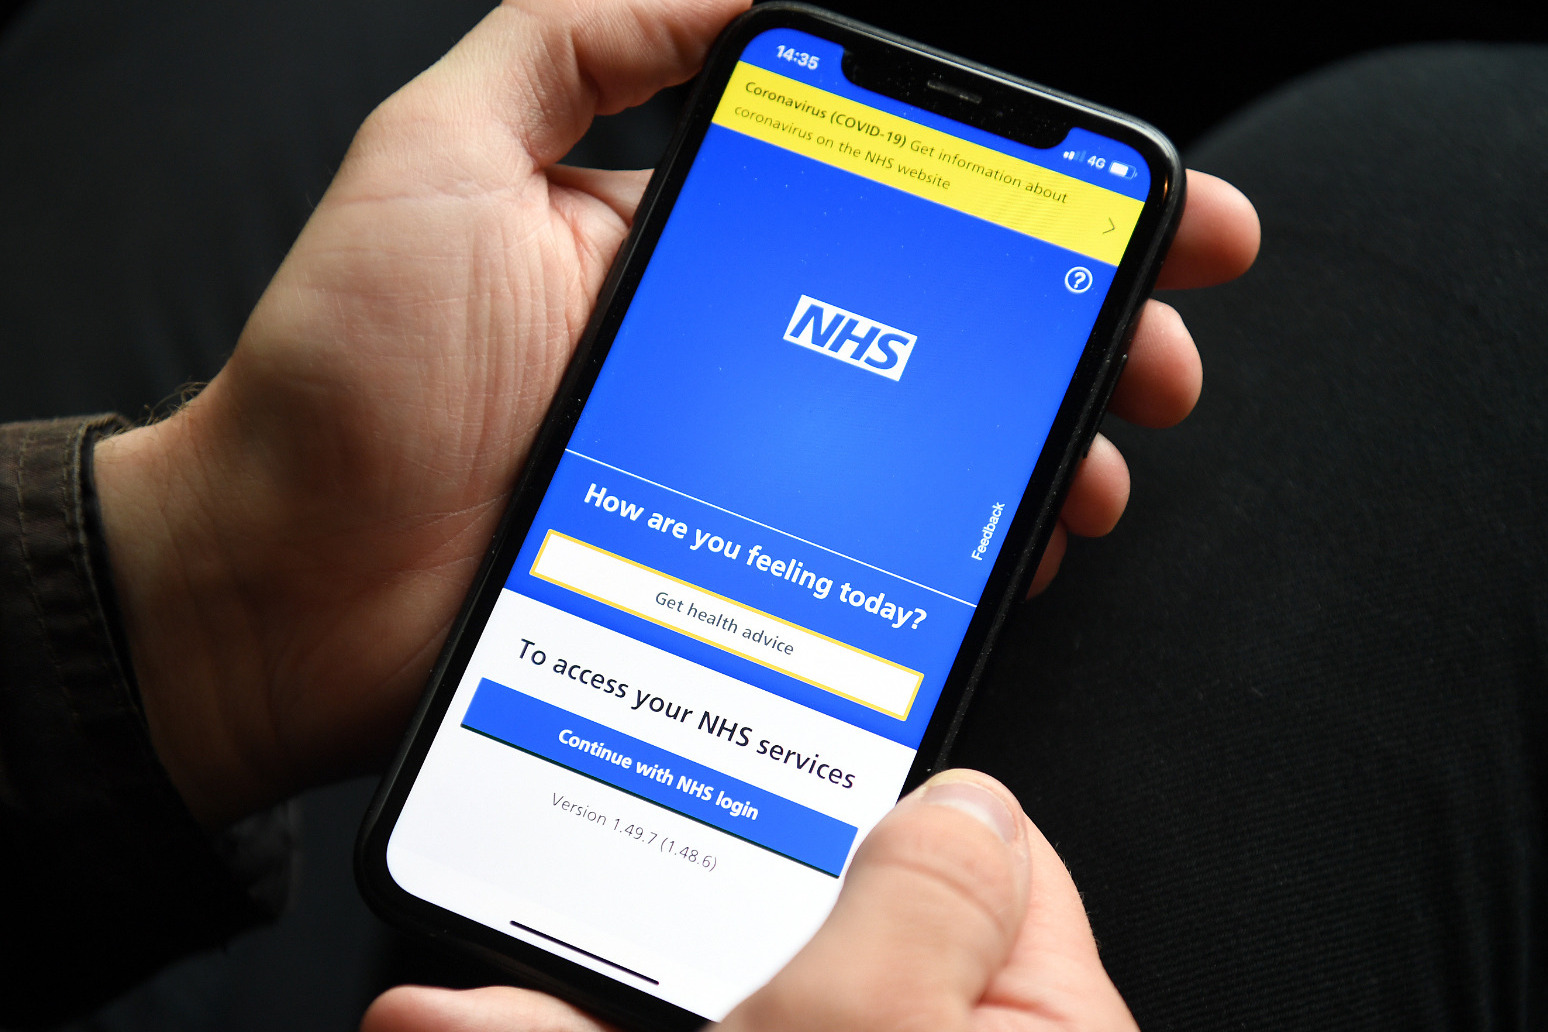 NHS App is most downloaded free iPhone app this year 